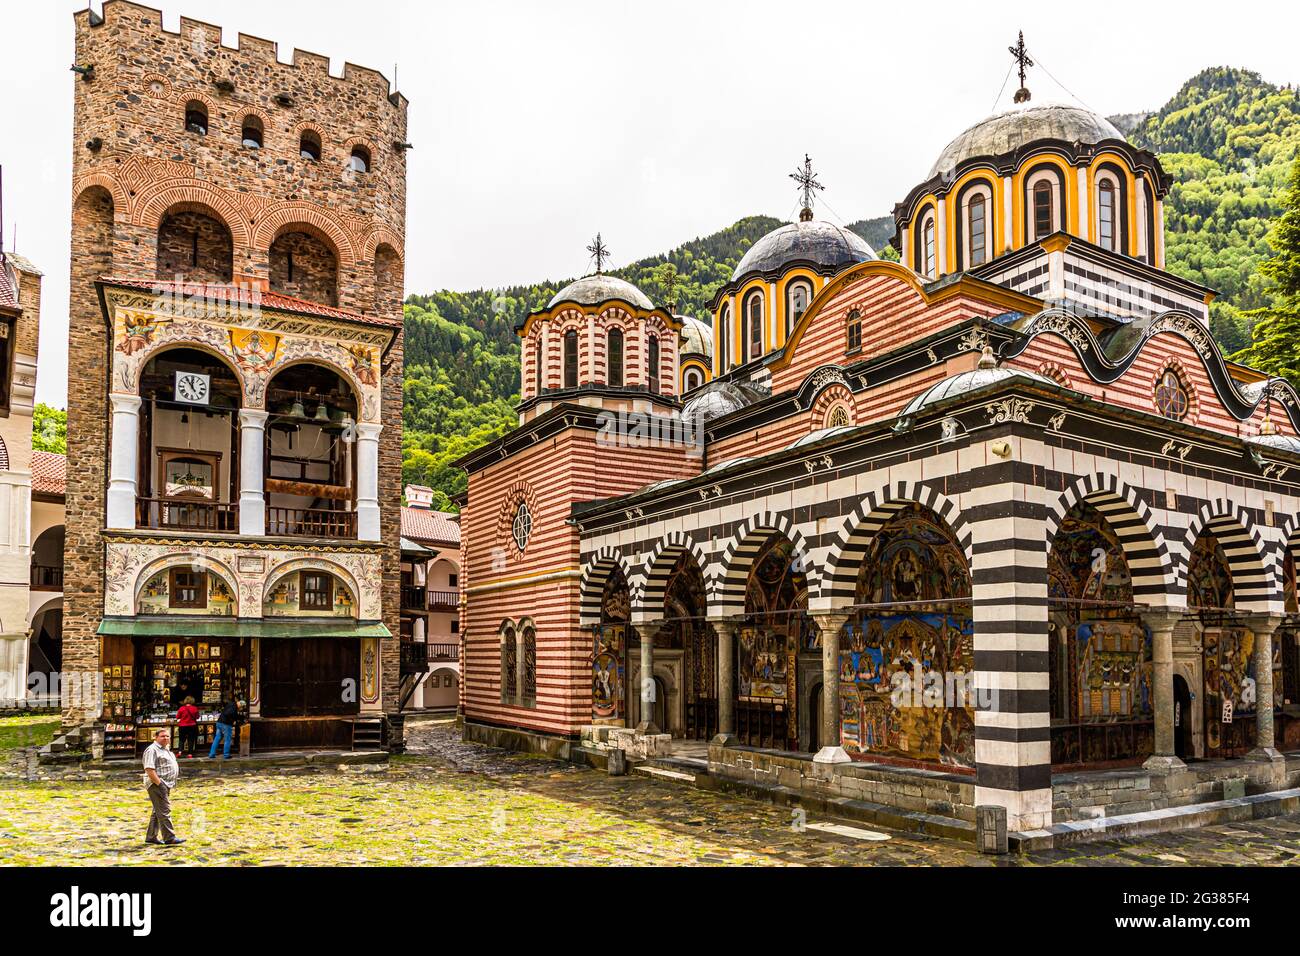 The Monastery of Saint Ivan of Rila, better known as the Rila Monastery (Bulgarian: Рилски манастир, Rilski manastir) is the largest and most famous Eastern Orthodox monastery in Bulgaria.It belongs to the UNESCO World Heritage. Chreljo, the defense tower from the 13th century stands in the courtyard and is the oldest building of the monastery Stock Photo